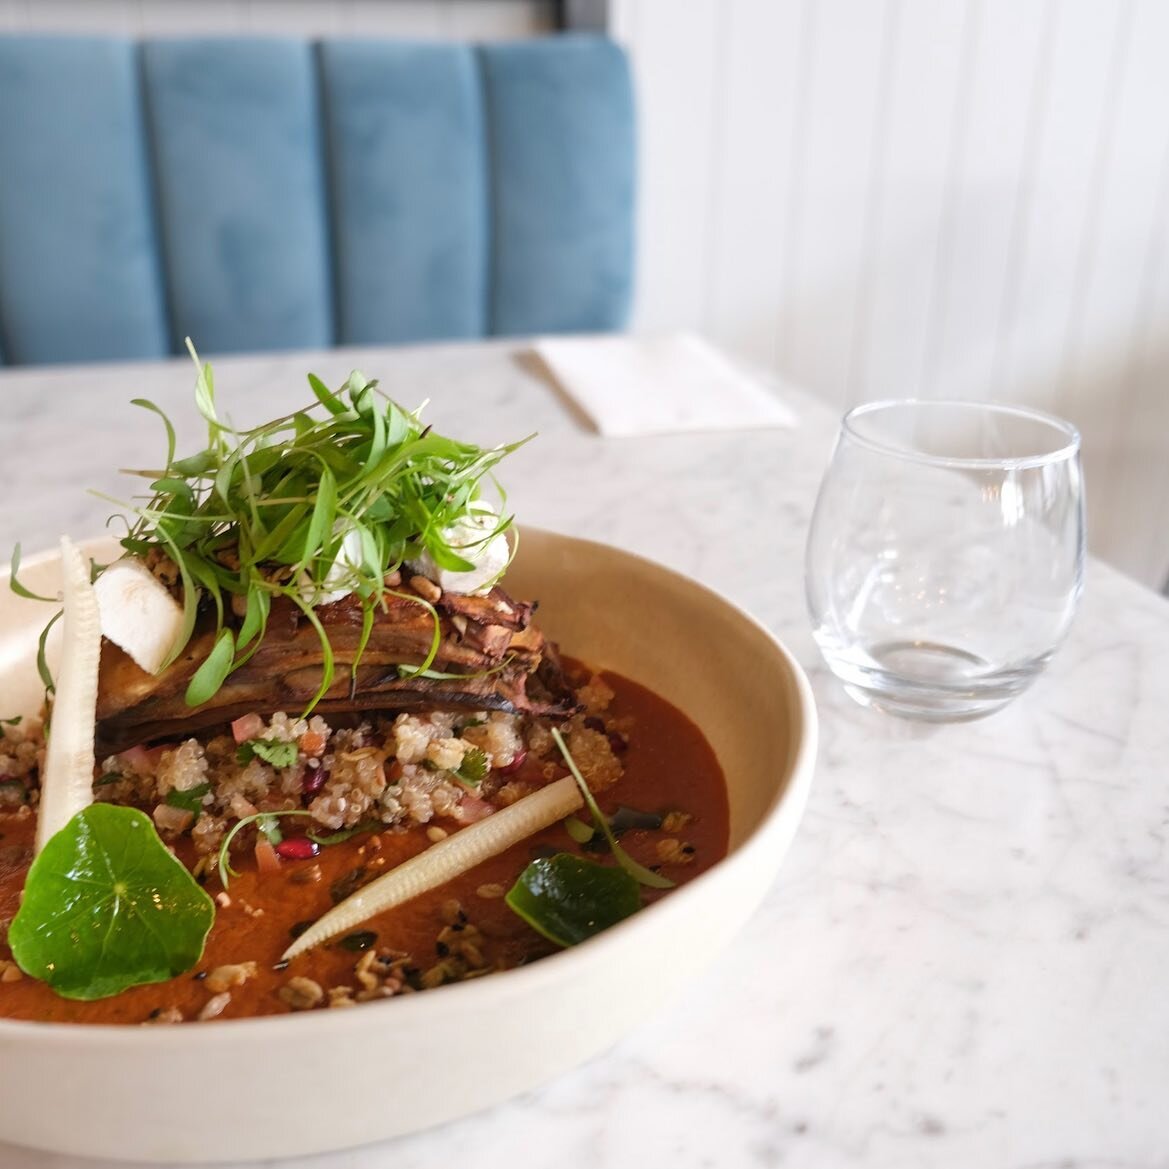 Have you tried our Harissa Eggplant yet? 

With eggplant and harissa soup, eggplant terrine, savoury oat and cumin granola, ancient grain salad, Persian feta, tomato and pomegranate with black lime dressing. 

A delicious warm vegetarian dish that is